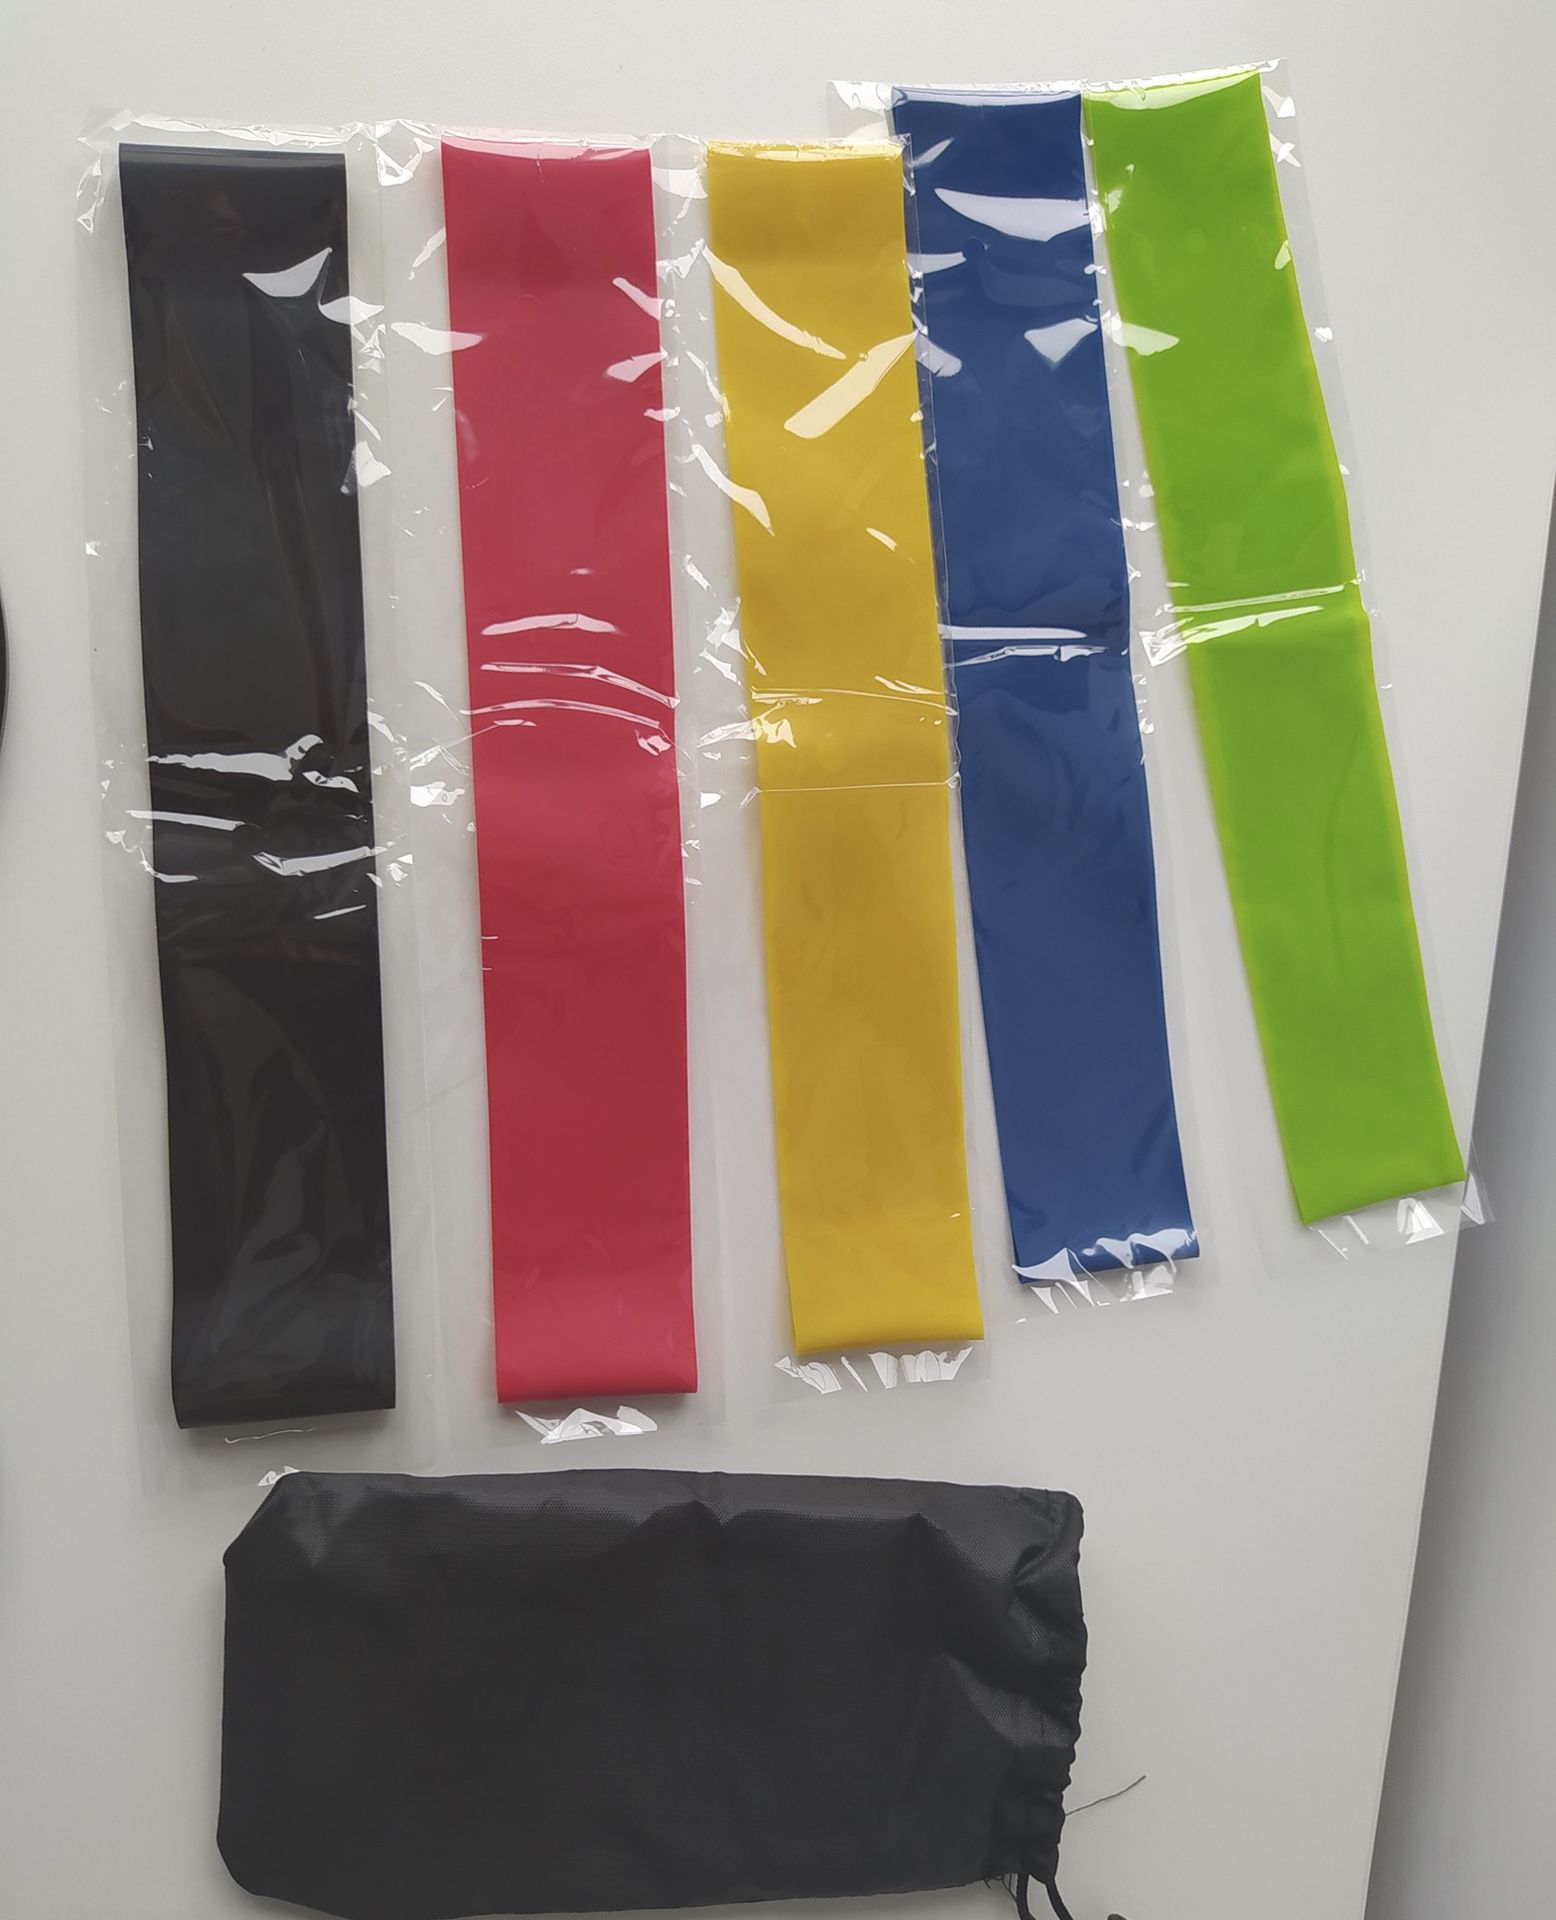 BRAND NEW 5 Piece Latex Resistance Bands Set